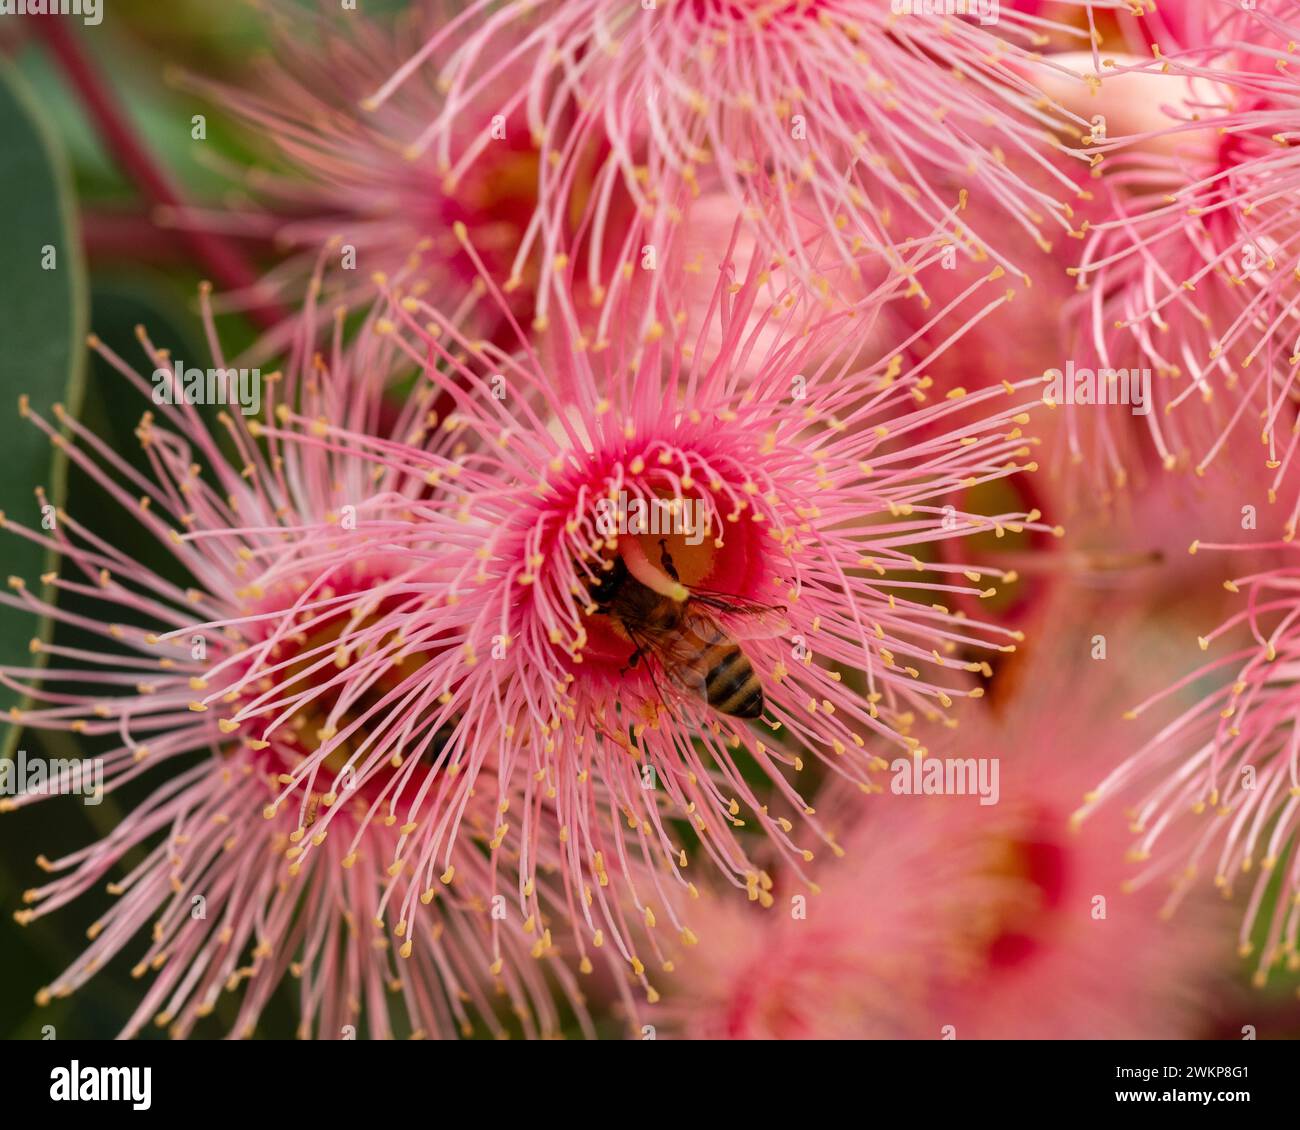 A bee inside the centre of a Pink red Eucalyptus Gum tree flower or blossom, pollinating and collecting nectar, Australian garden Stock Photo